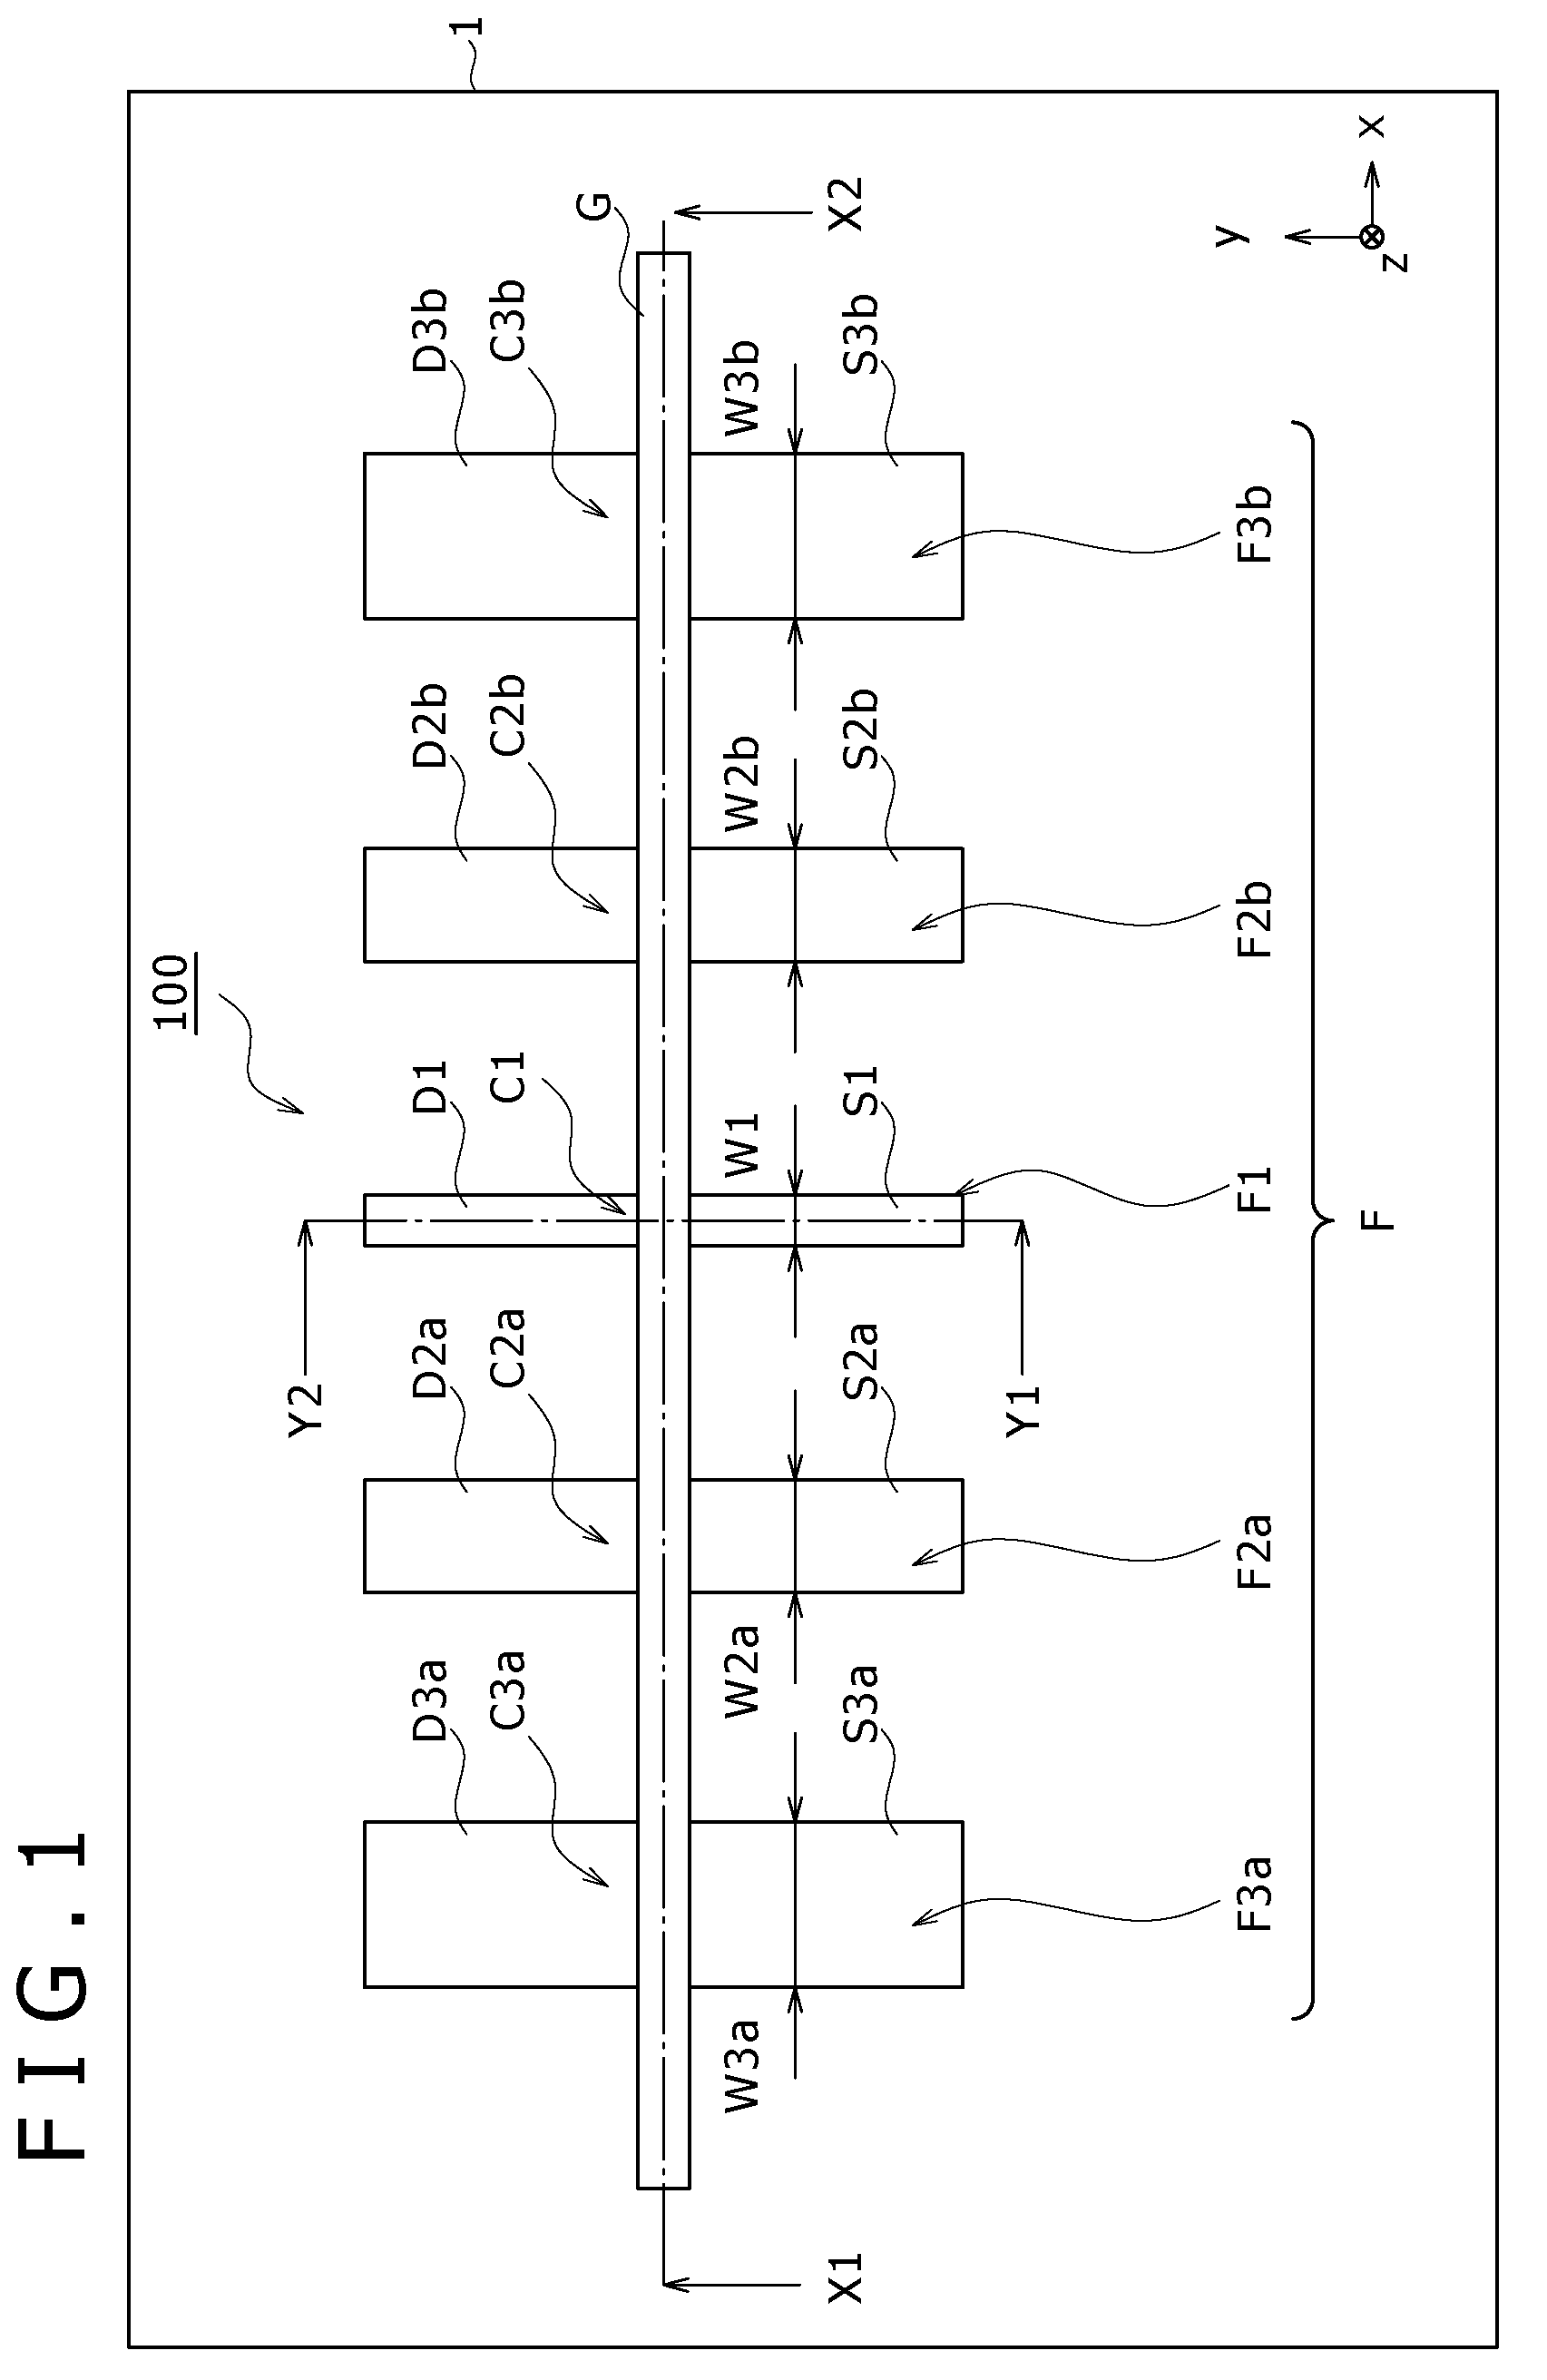 Semiconductor device having a fin field effect transistor